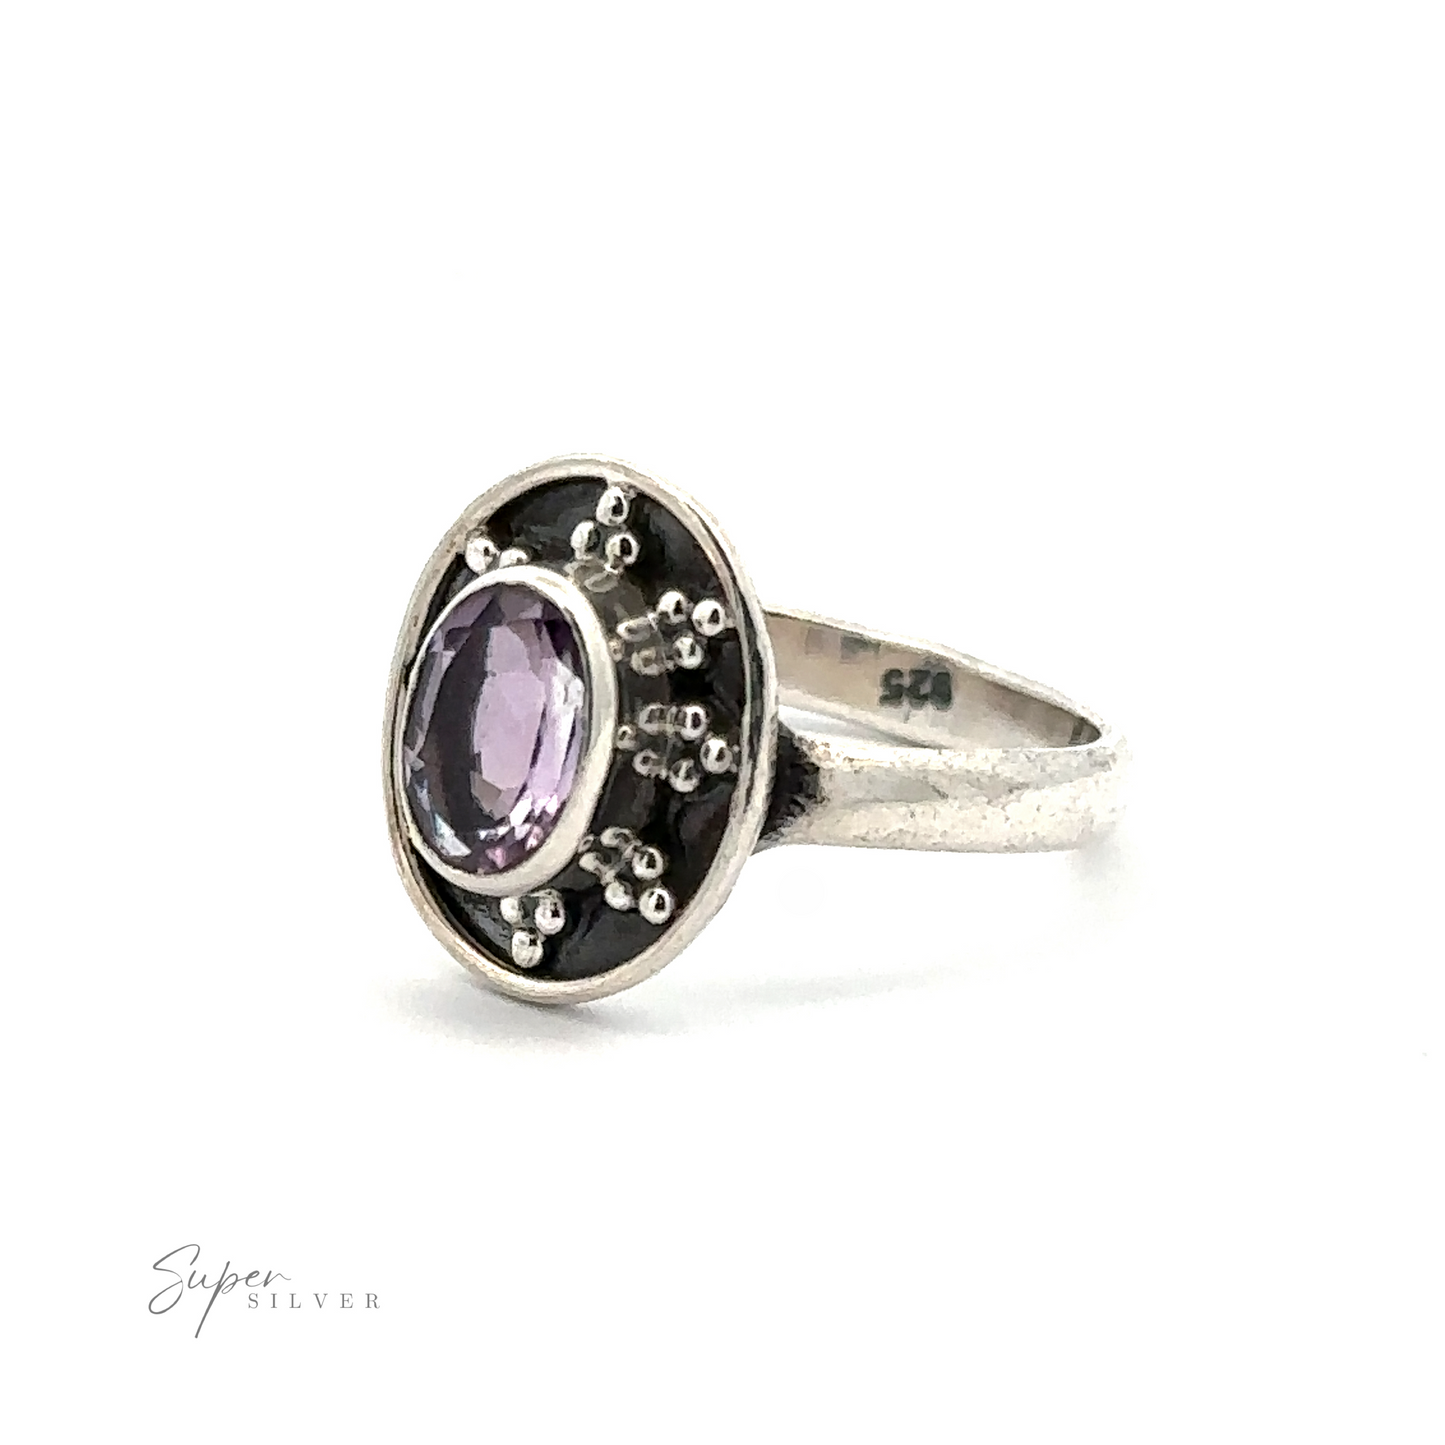 
                  
                    Oval Gemstone Ring with Ball and Disk Border with an oval-shaped purple gemstone and intricate metalwork, displayed against a white background. "Super Silver" is visible in the bottom left corner, giving this vintage-inspired jewelry piece an elegant touch.
                  
                